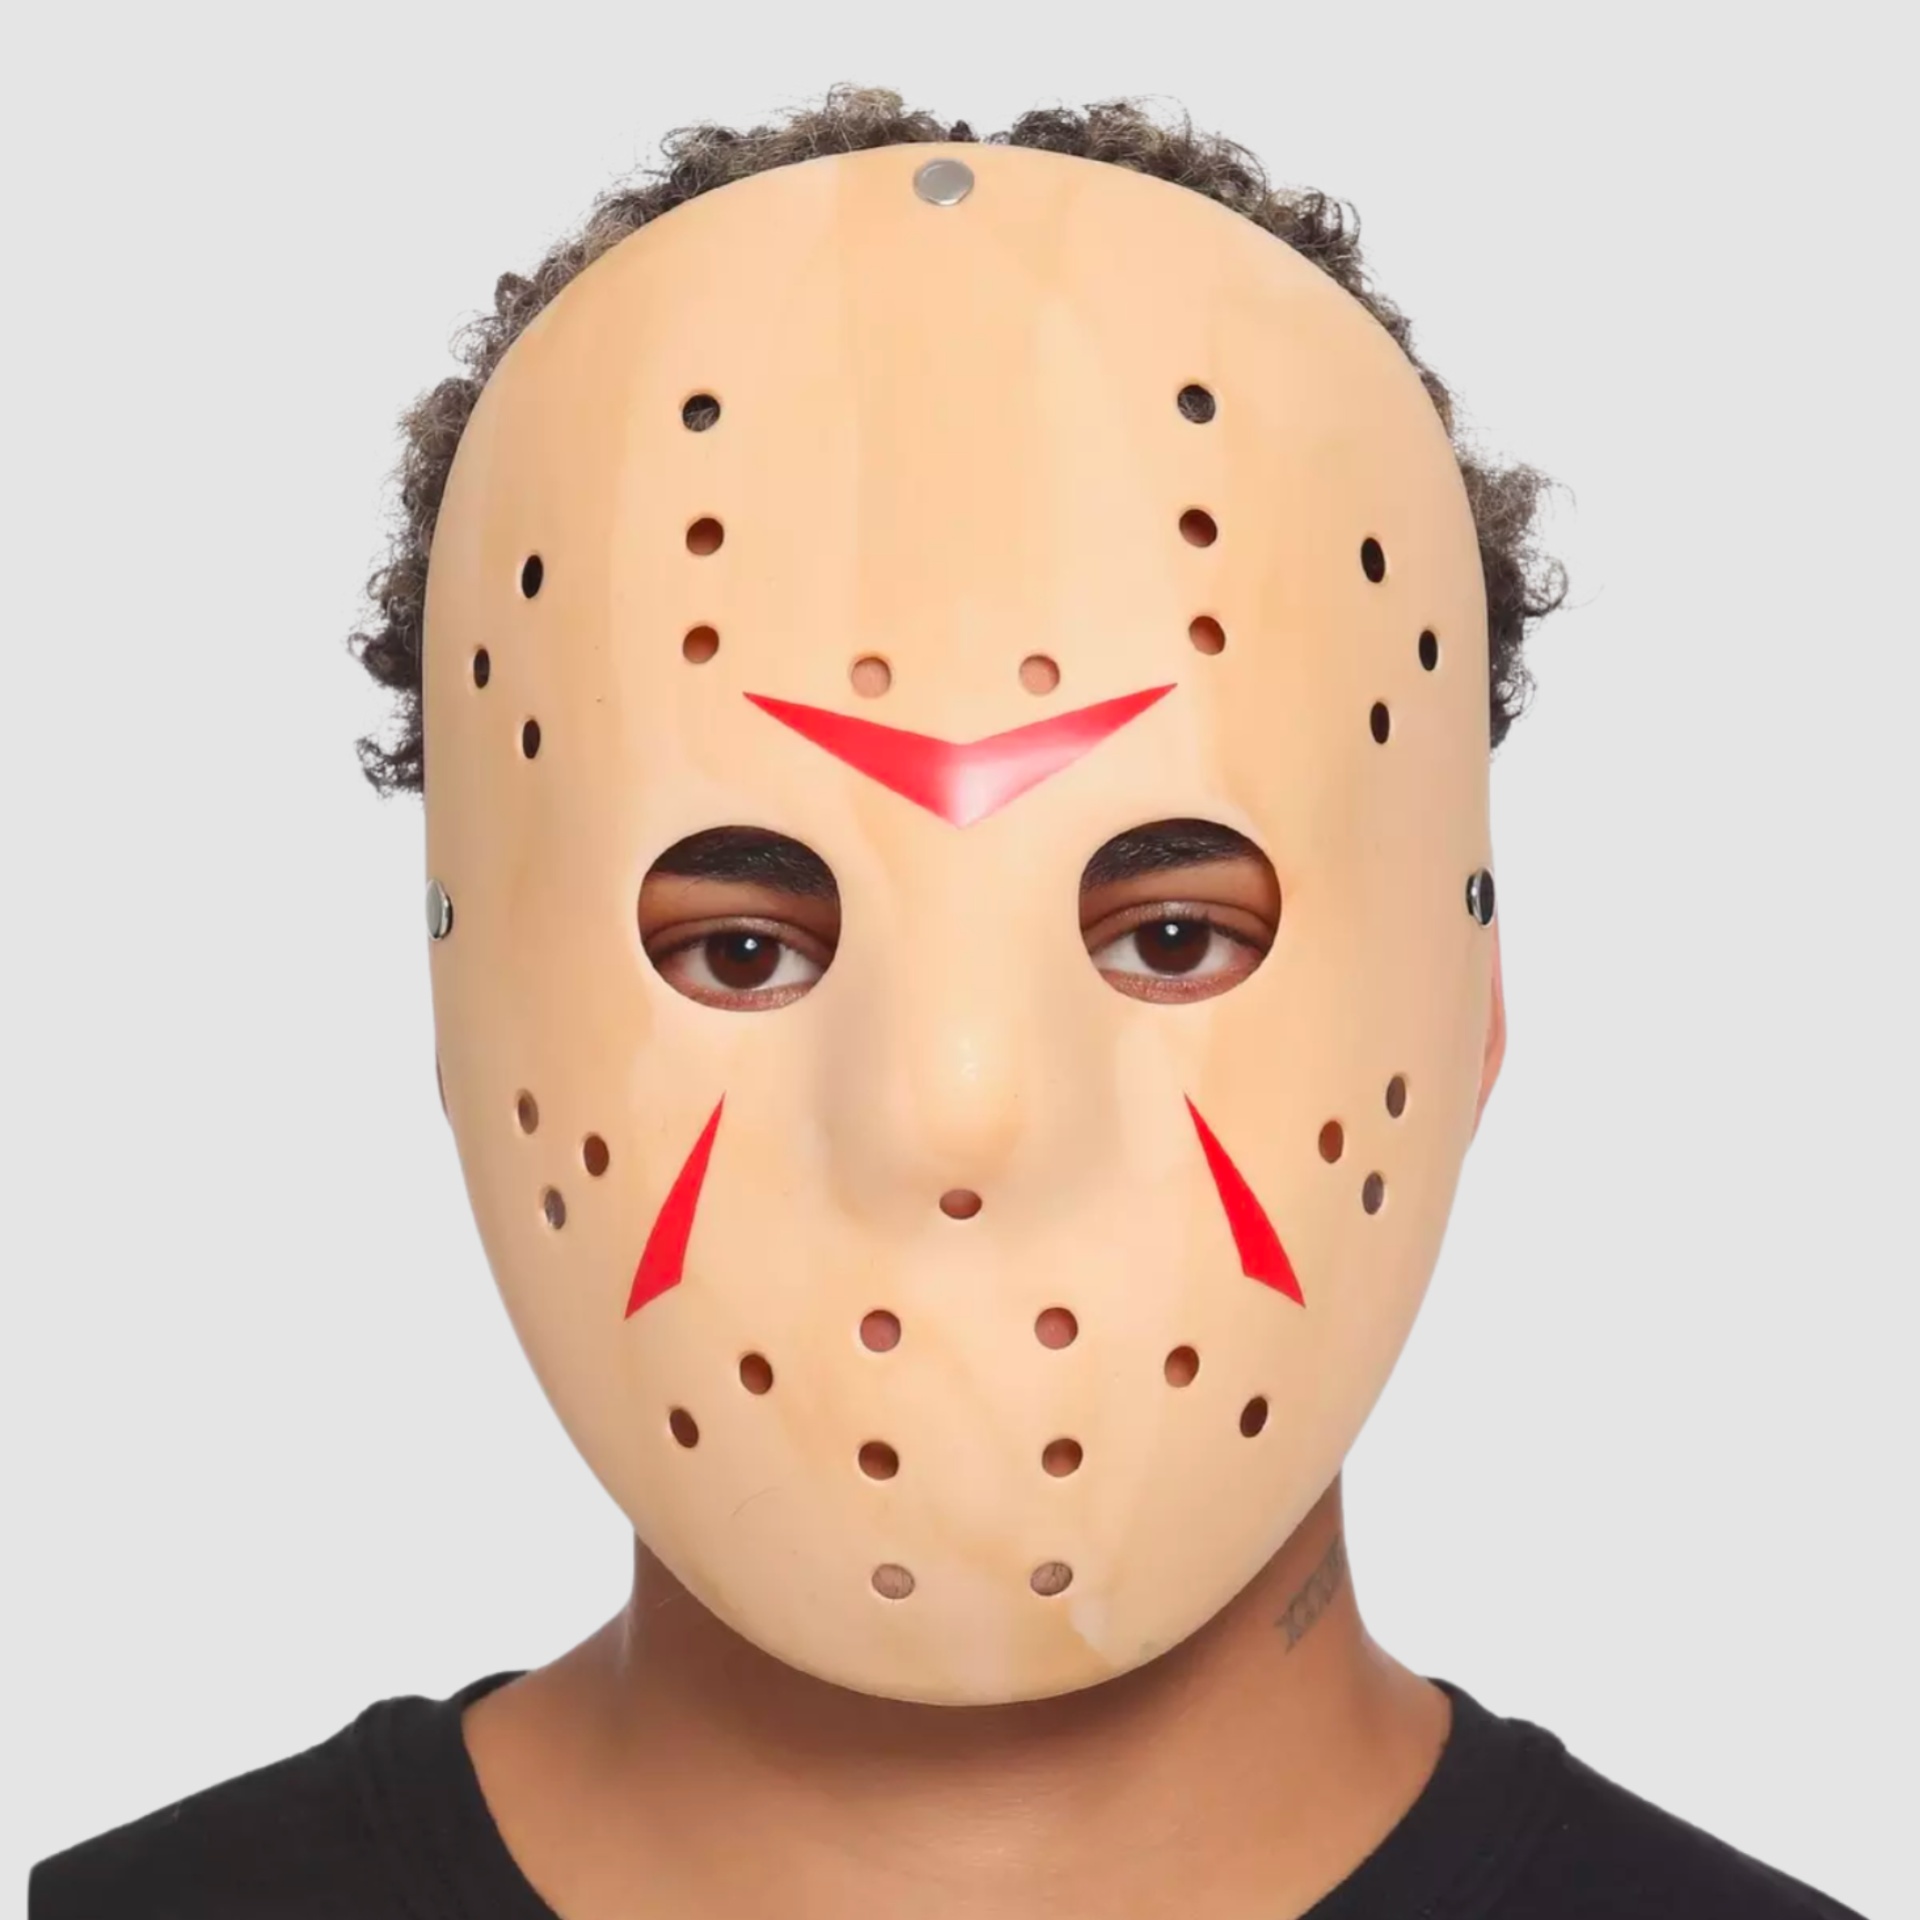 Friday The 13th Mask